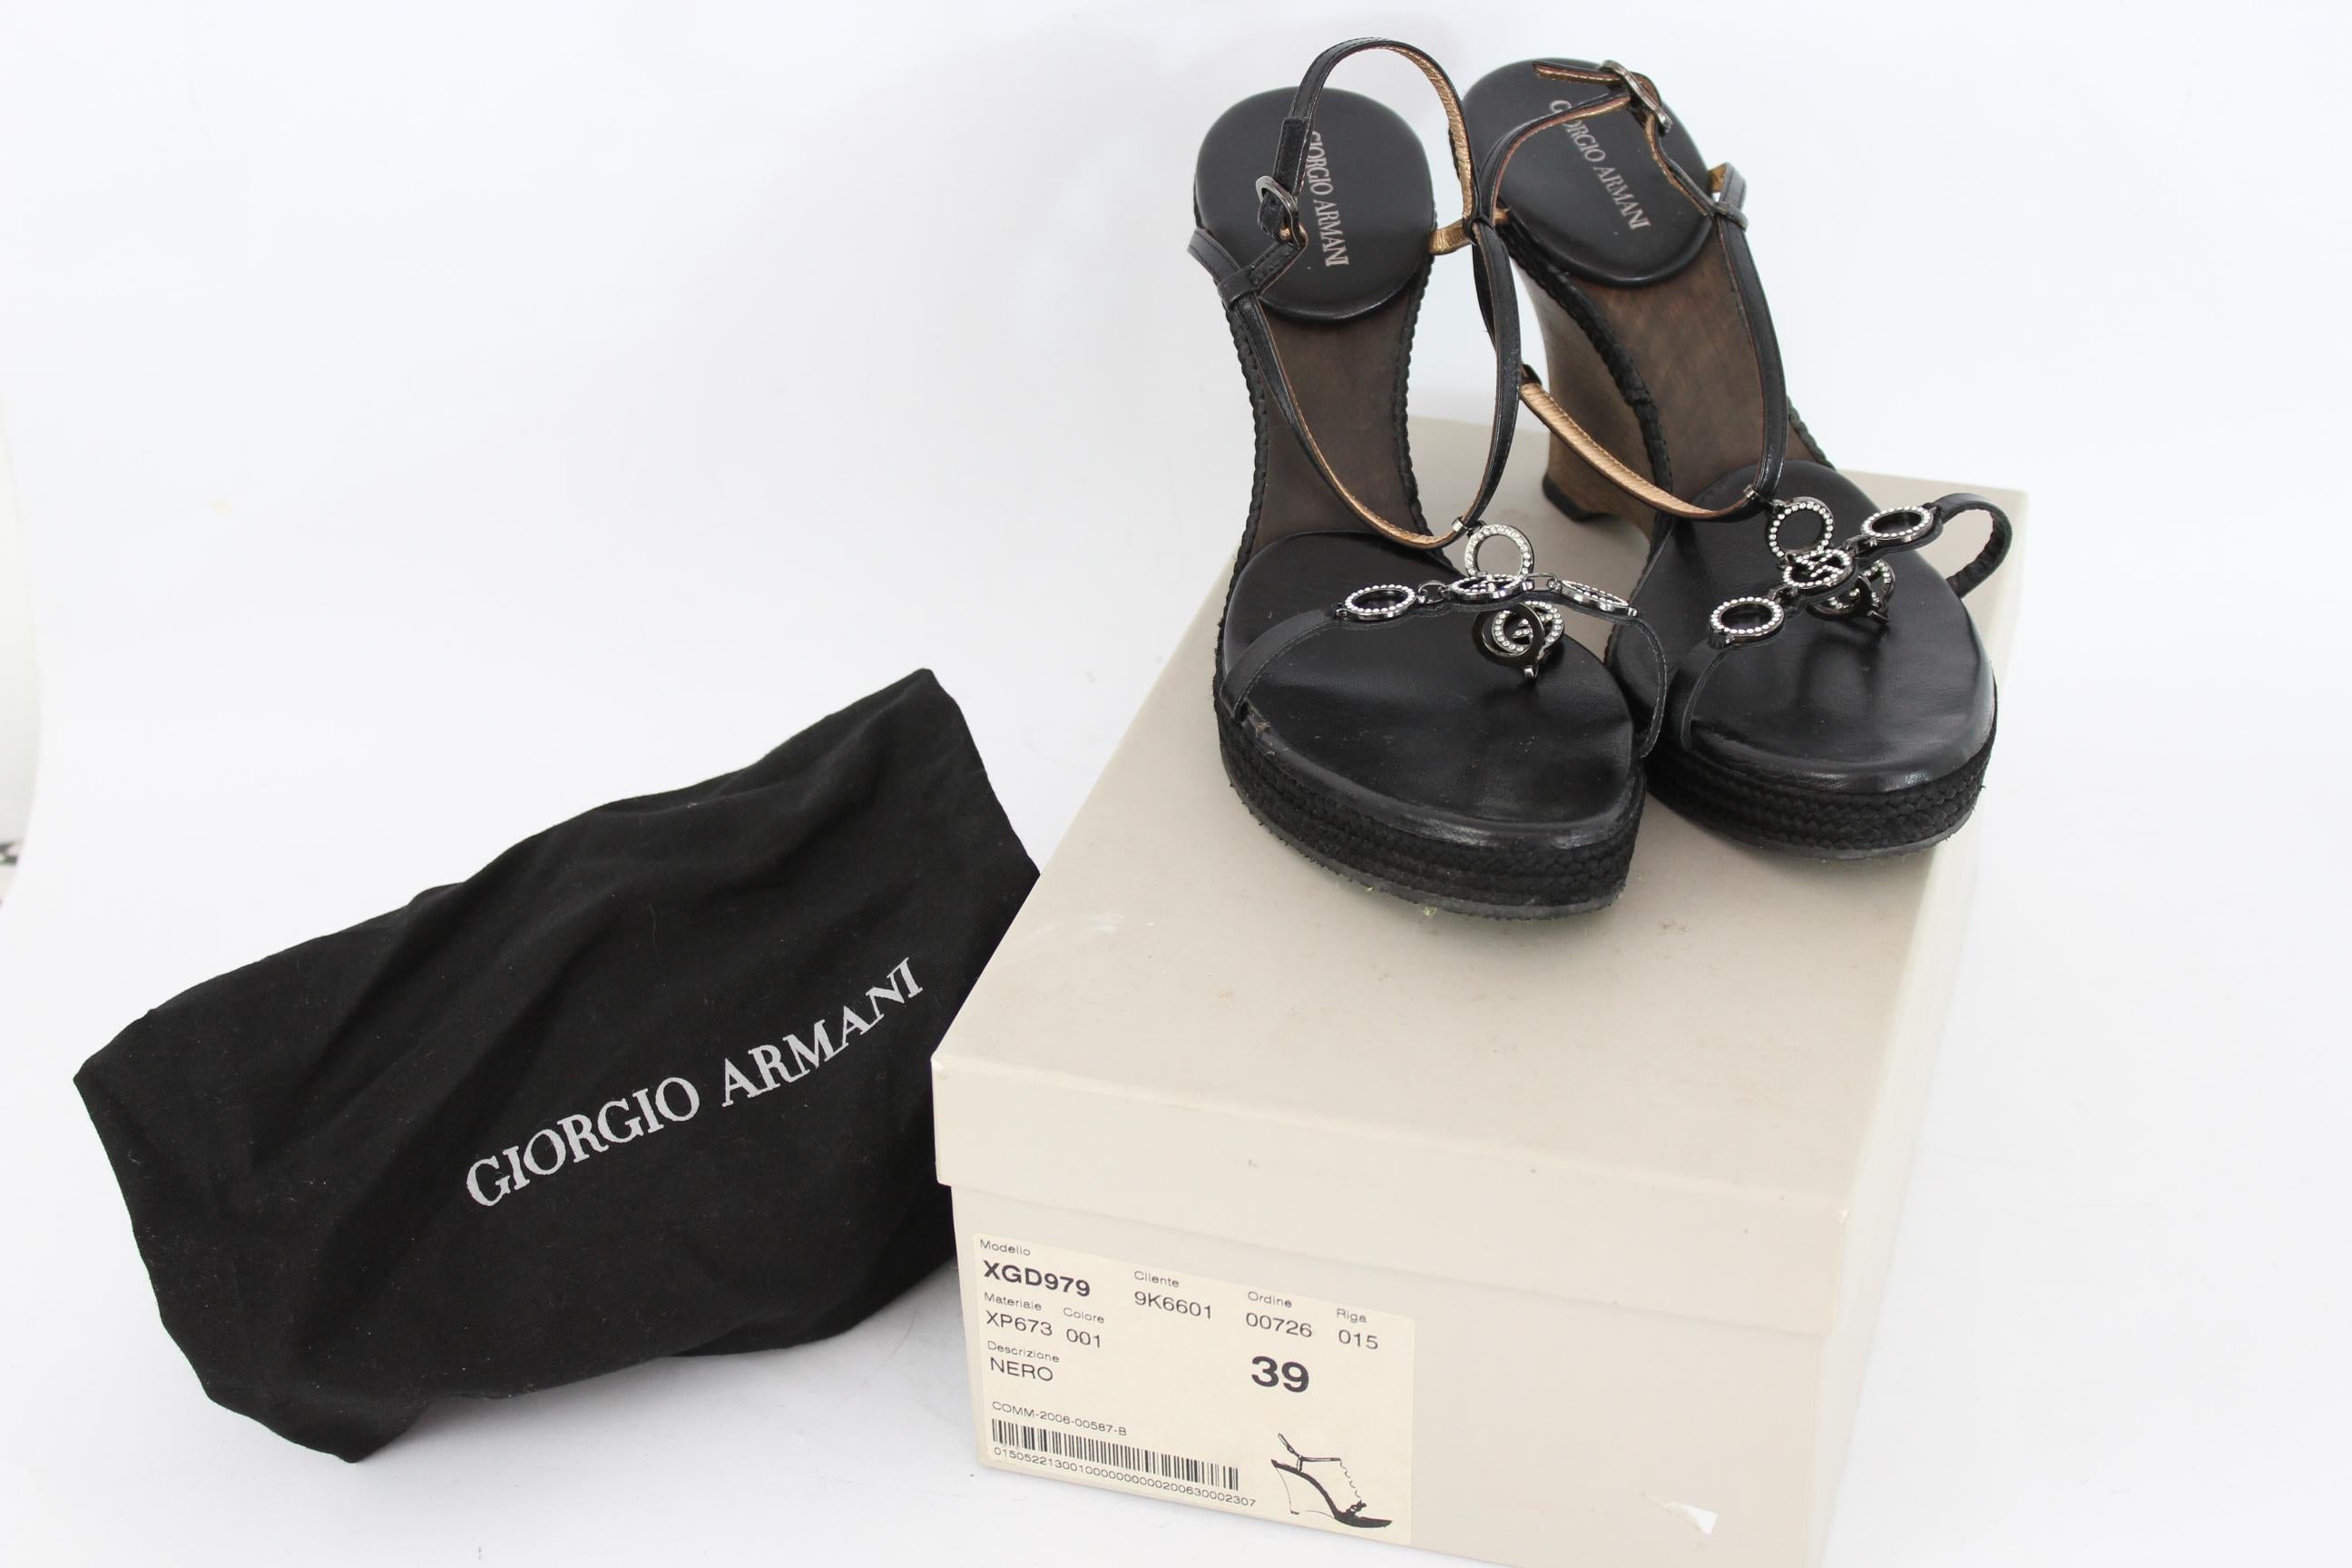 Giorgio Armani Black Leather Rhinestone Wedge Heel Jewel Shoes  In Excellent Condition In Brindisi, Bt